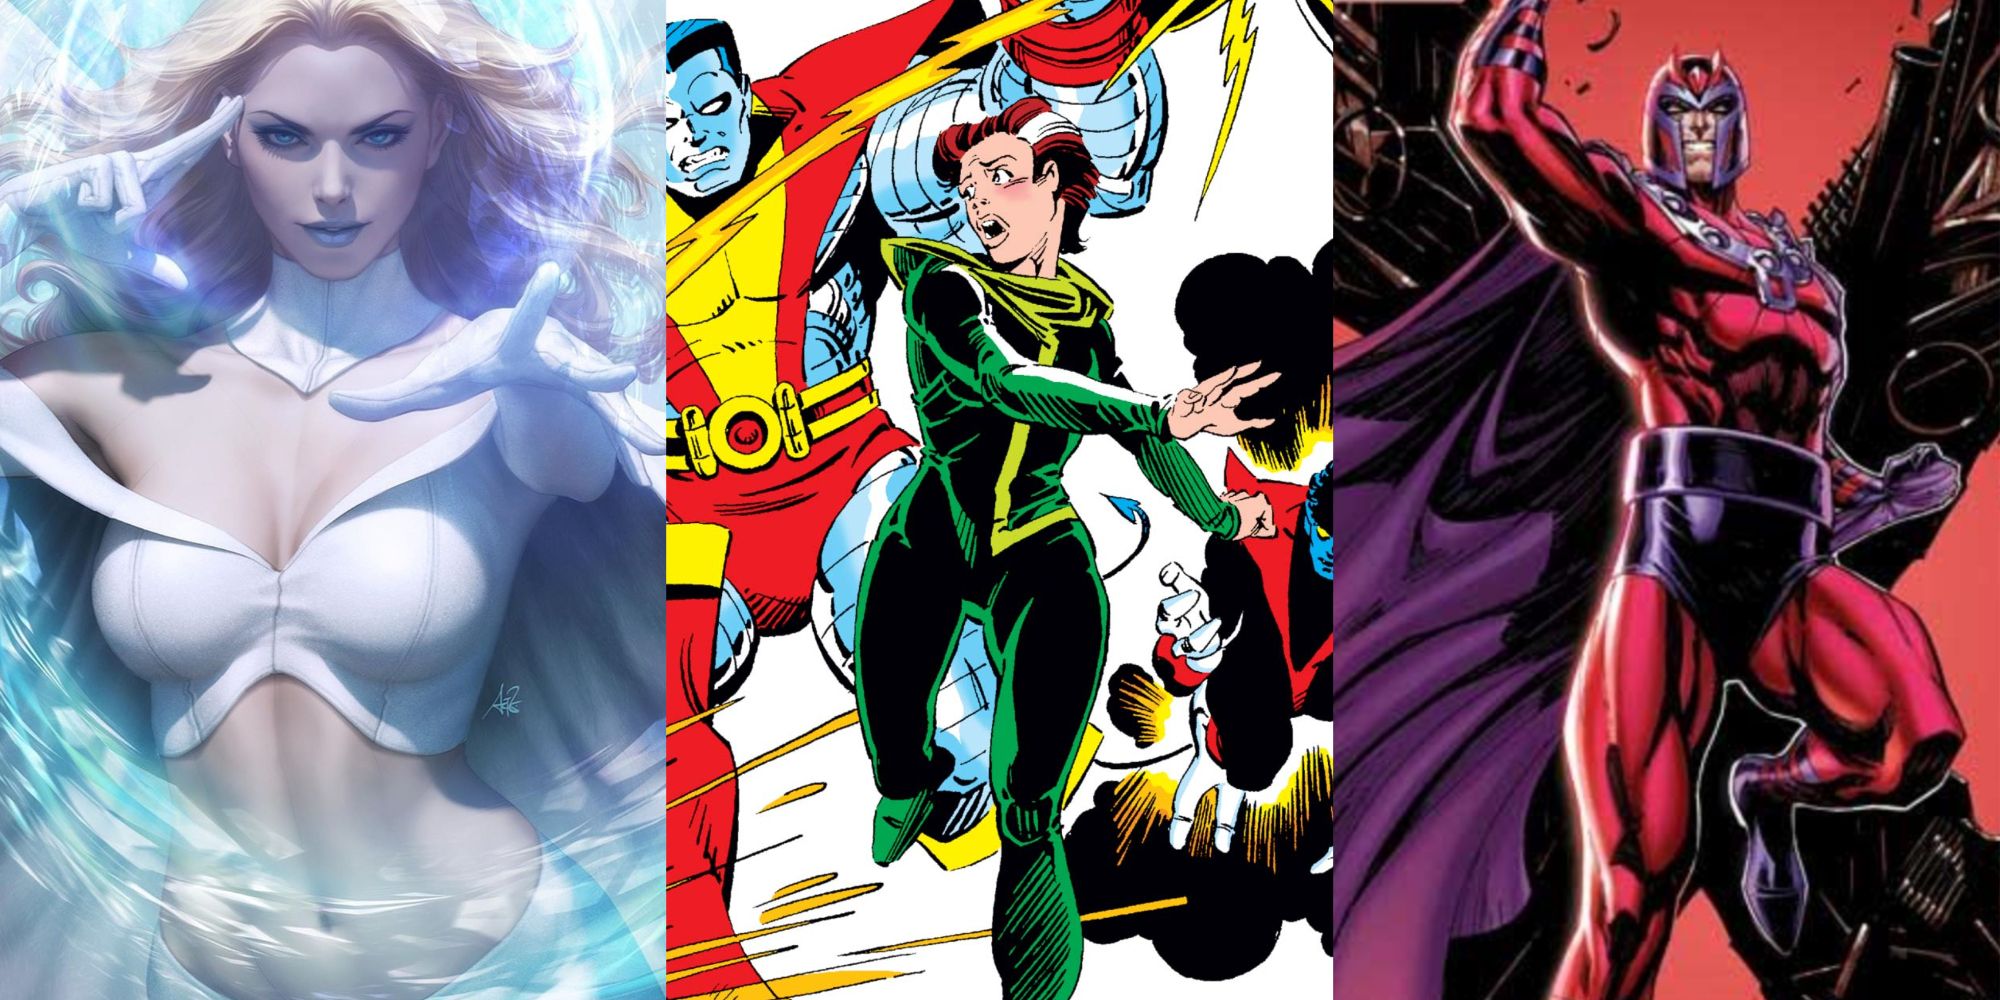 Split image of White Queen, Rogue, and Magneto from Marvel Comics.